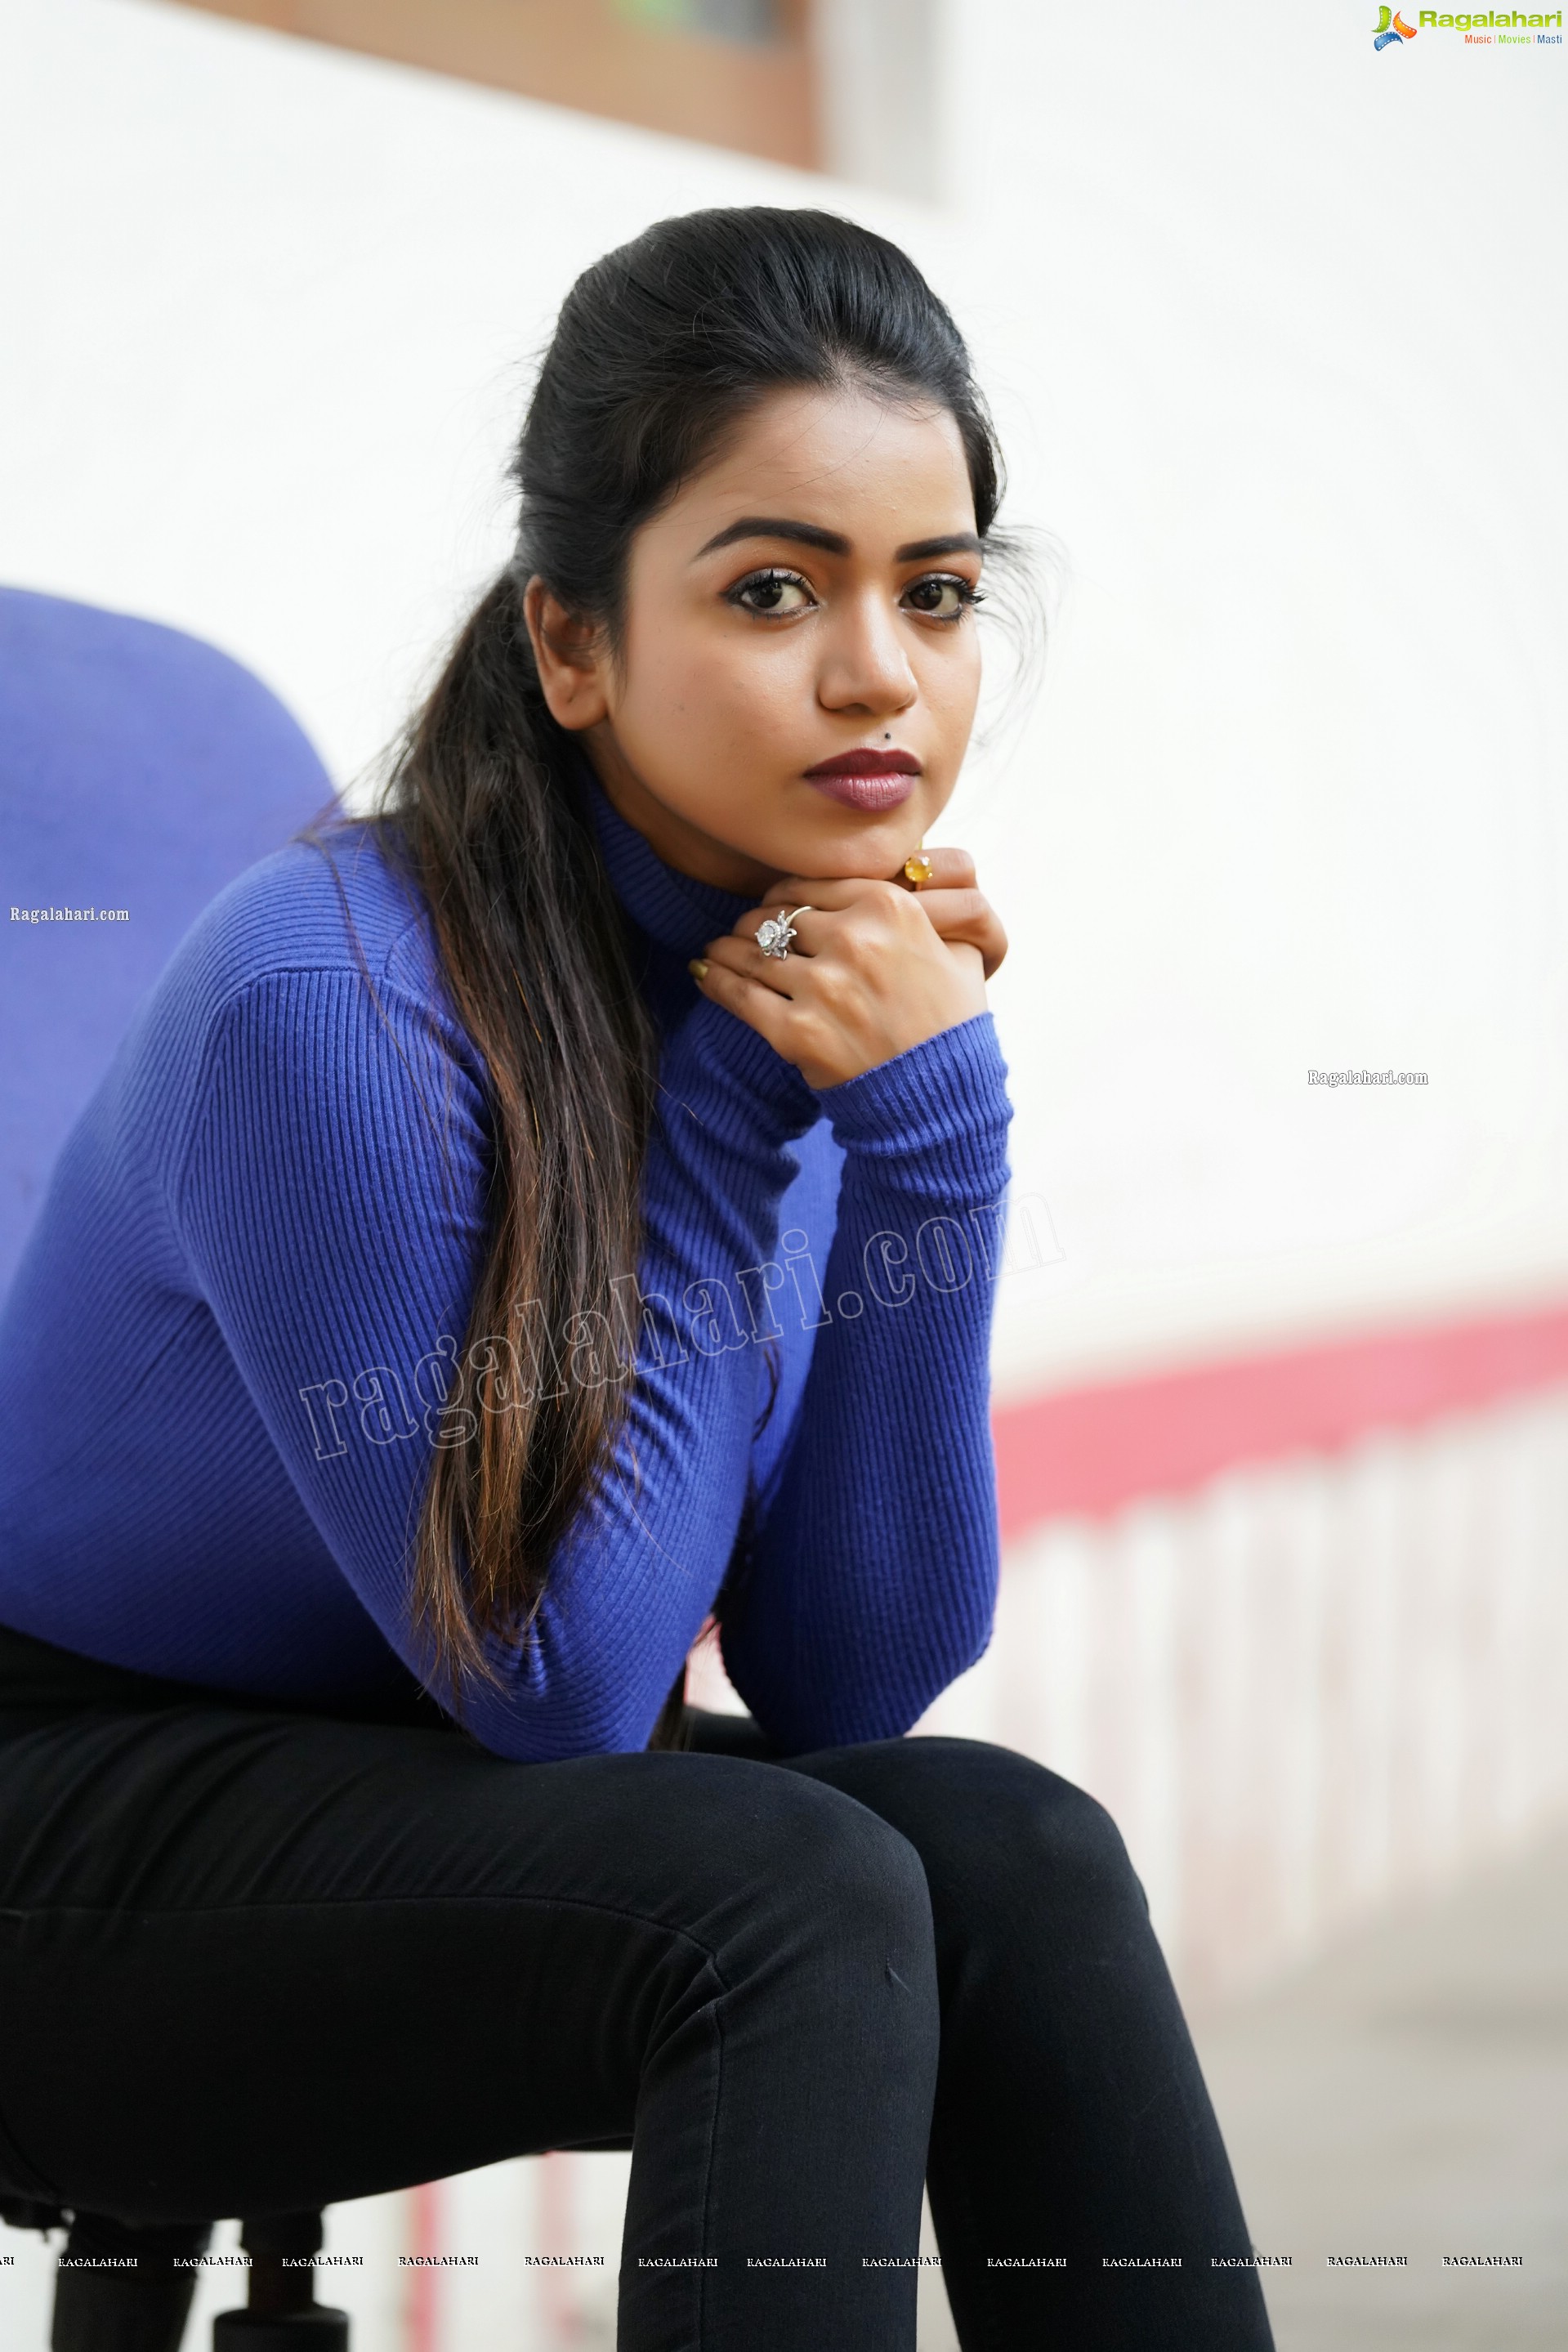 Bhavya Sri in Royal Blue Ribbed-Knit Turtleneck Top and Black Jeans, Exclusive Photoshoot